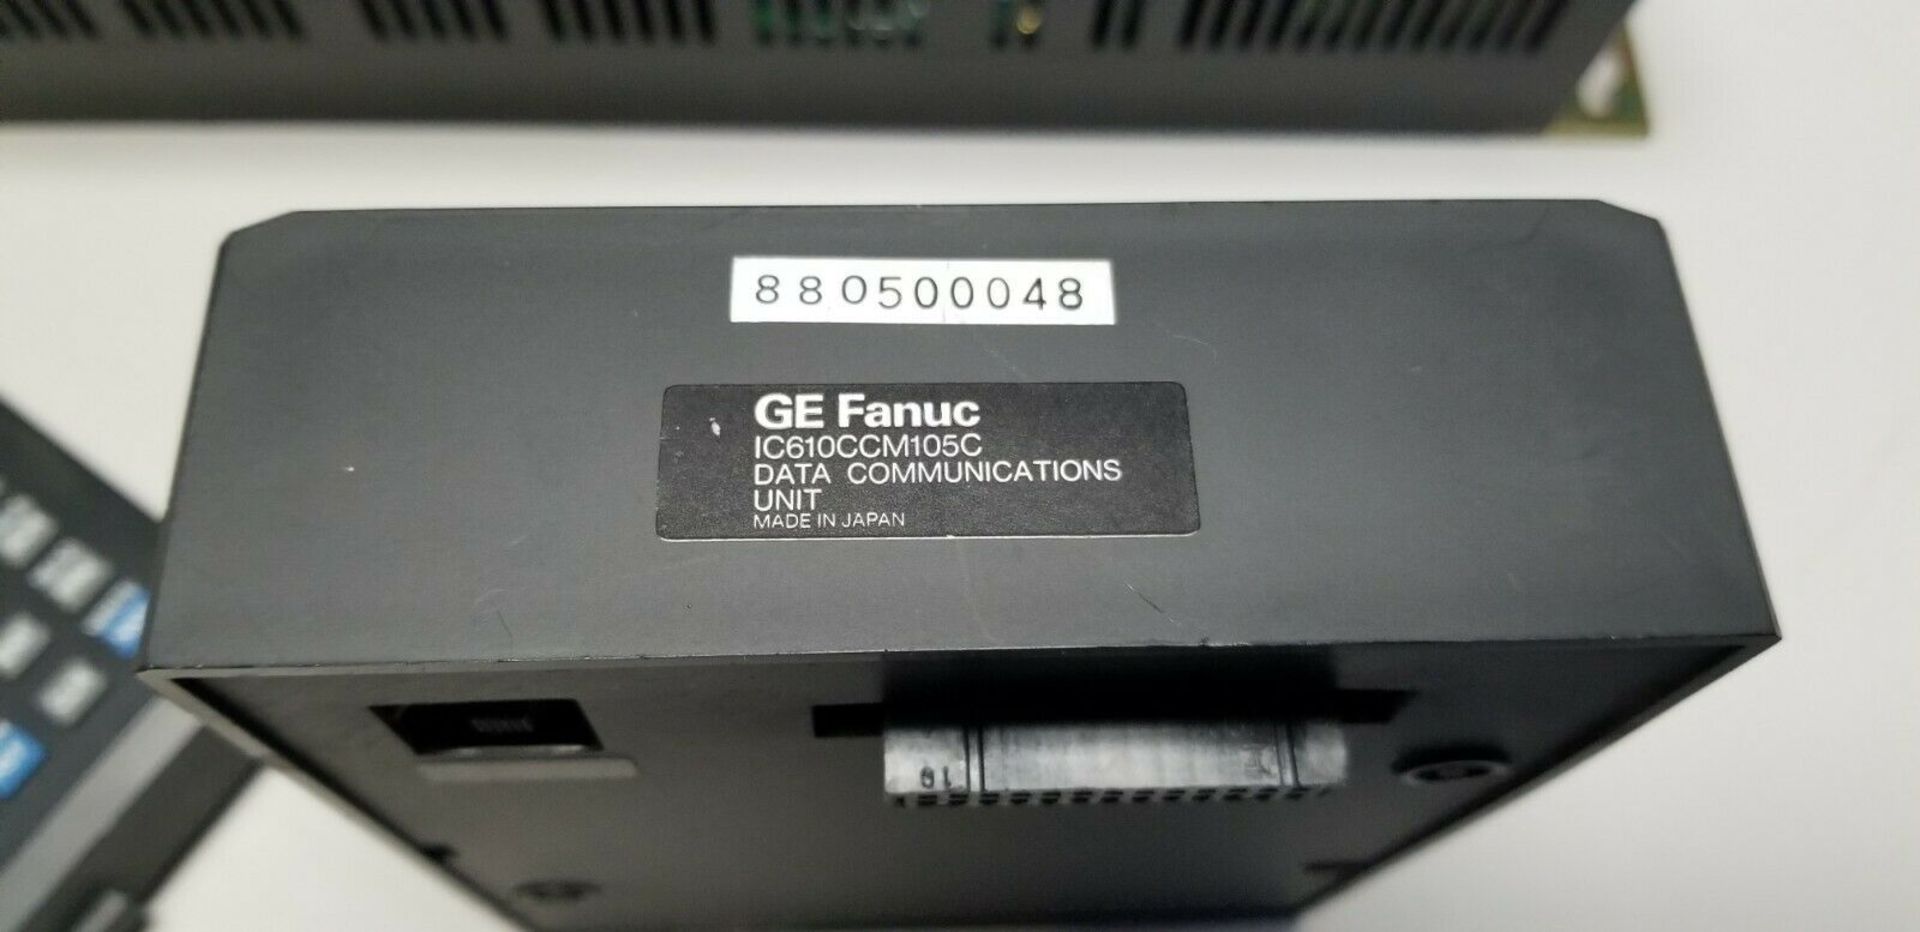 Ge Fanuc Series One PLC Rack With CPU, I/O Modules - Image 6 of 9